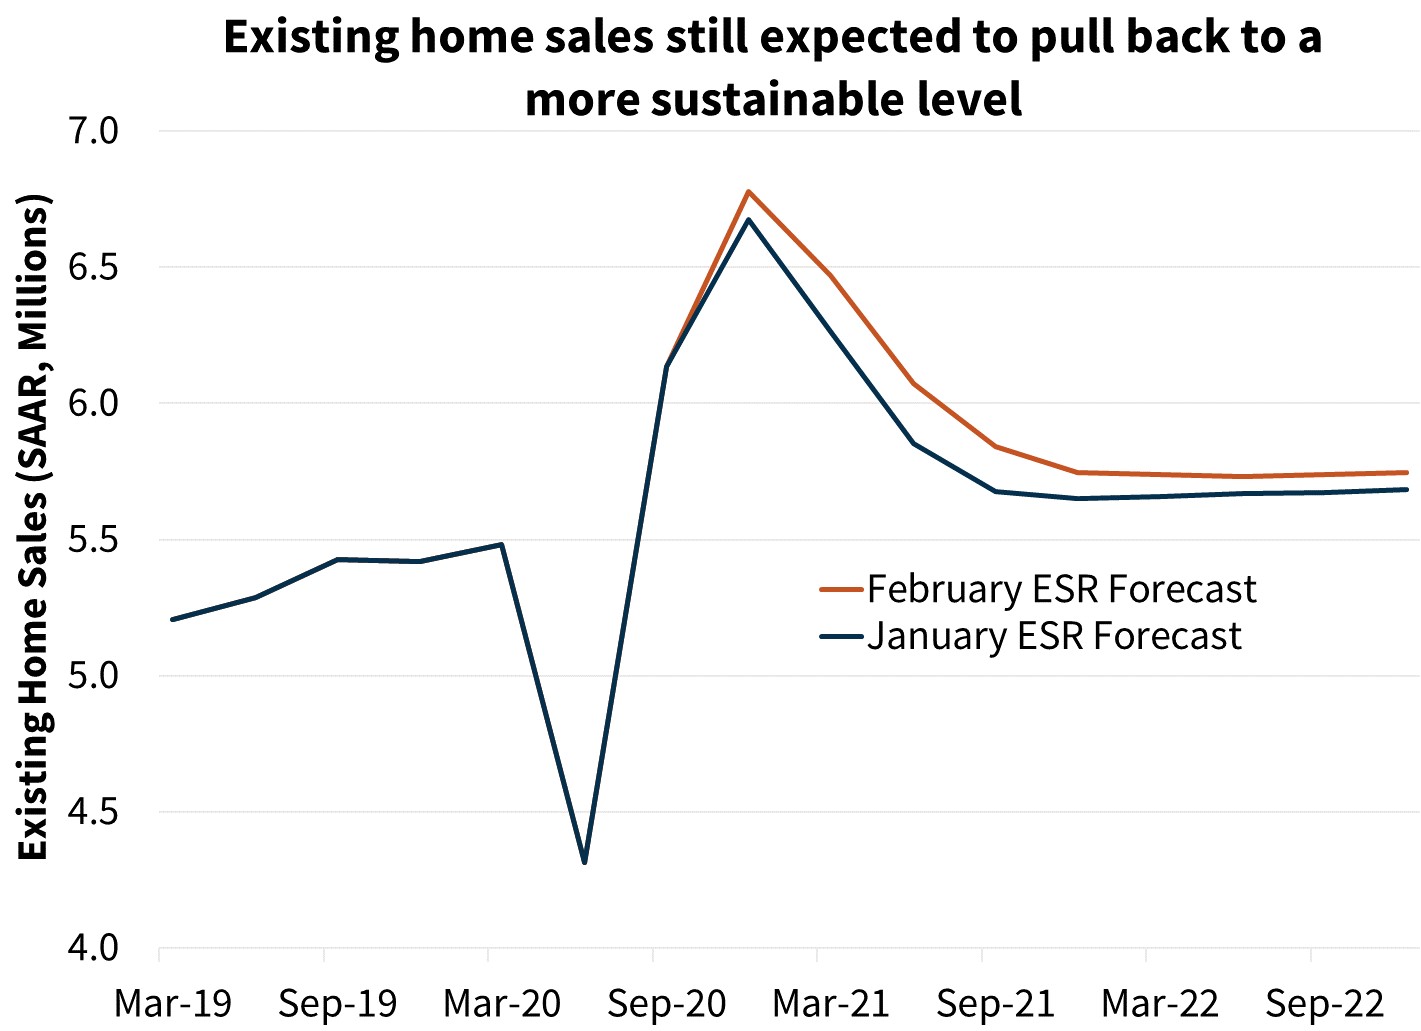 Existing home sales still expected to pull back to a more sustainable level
